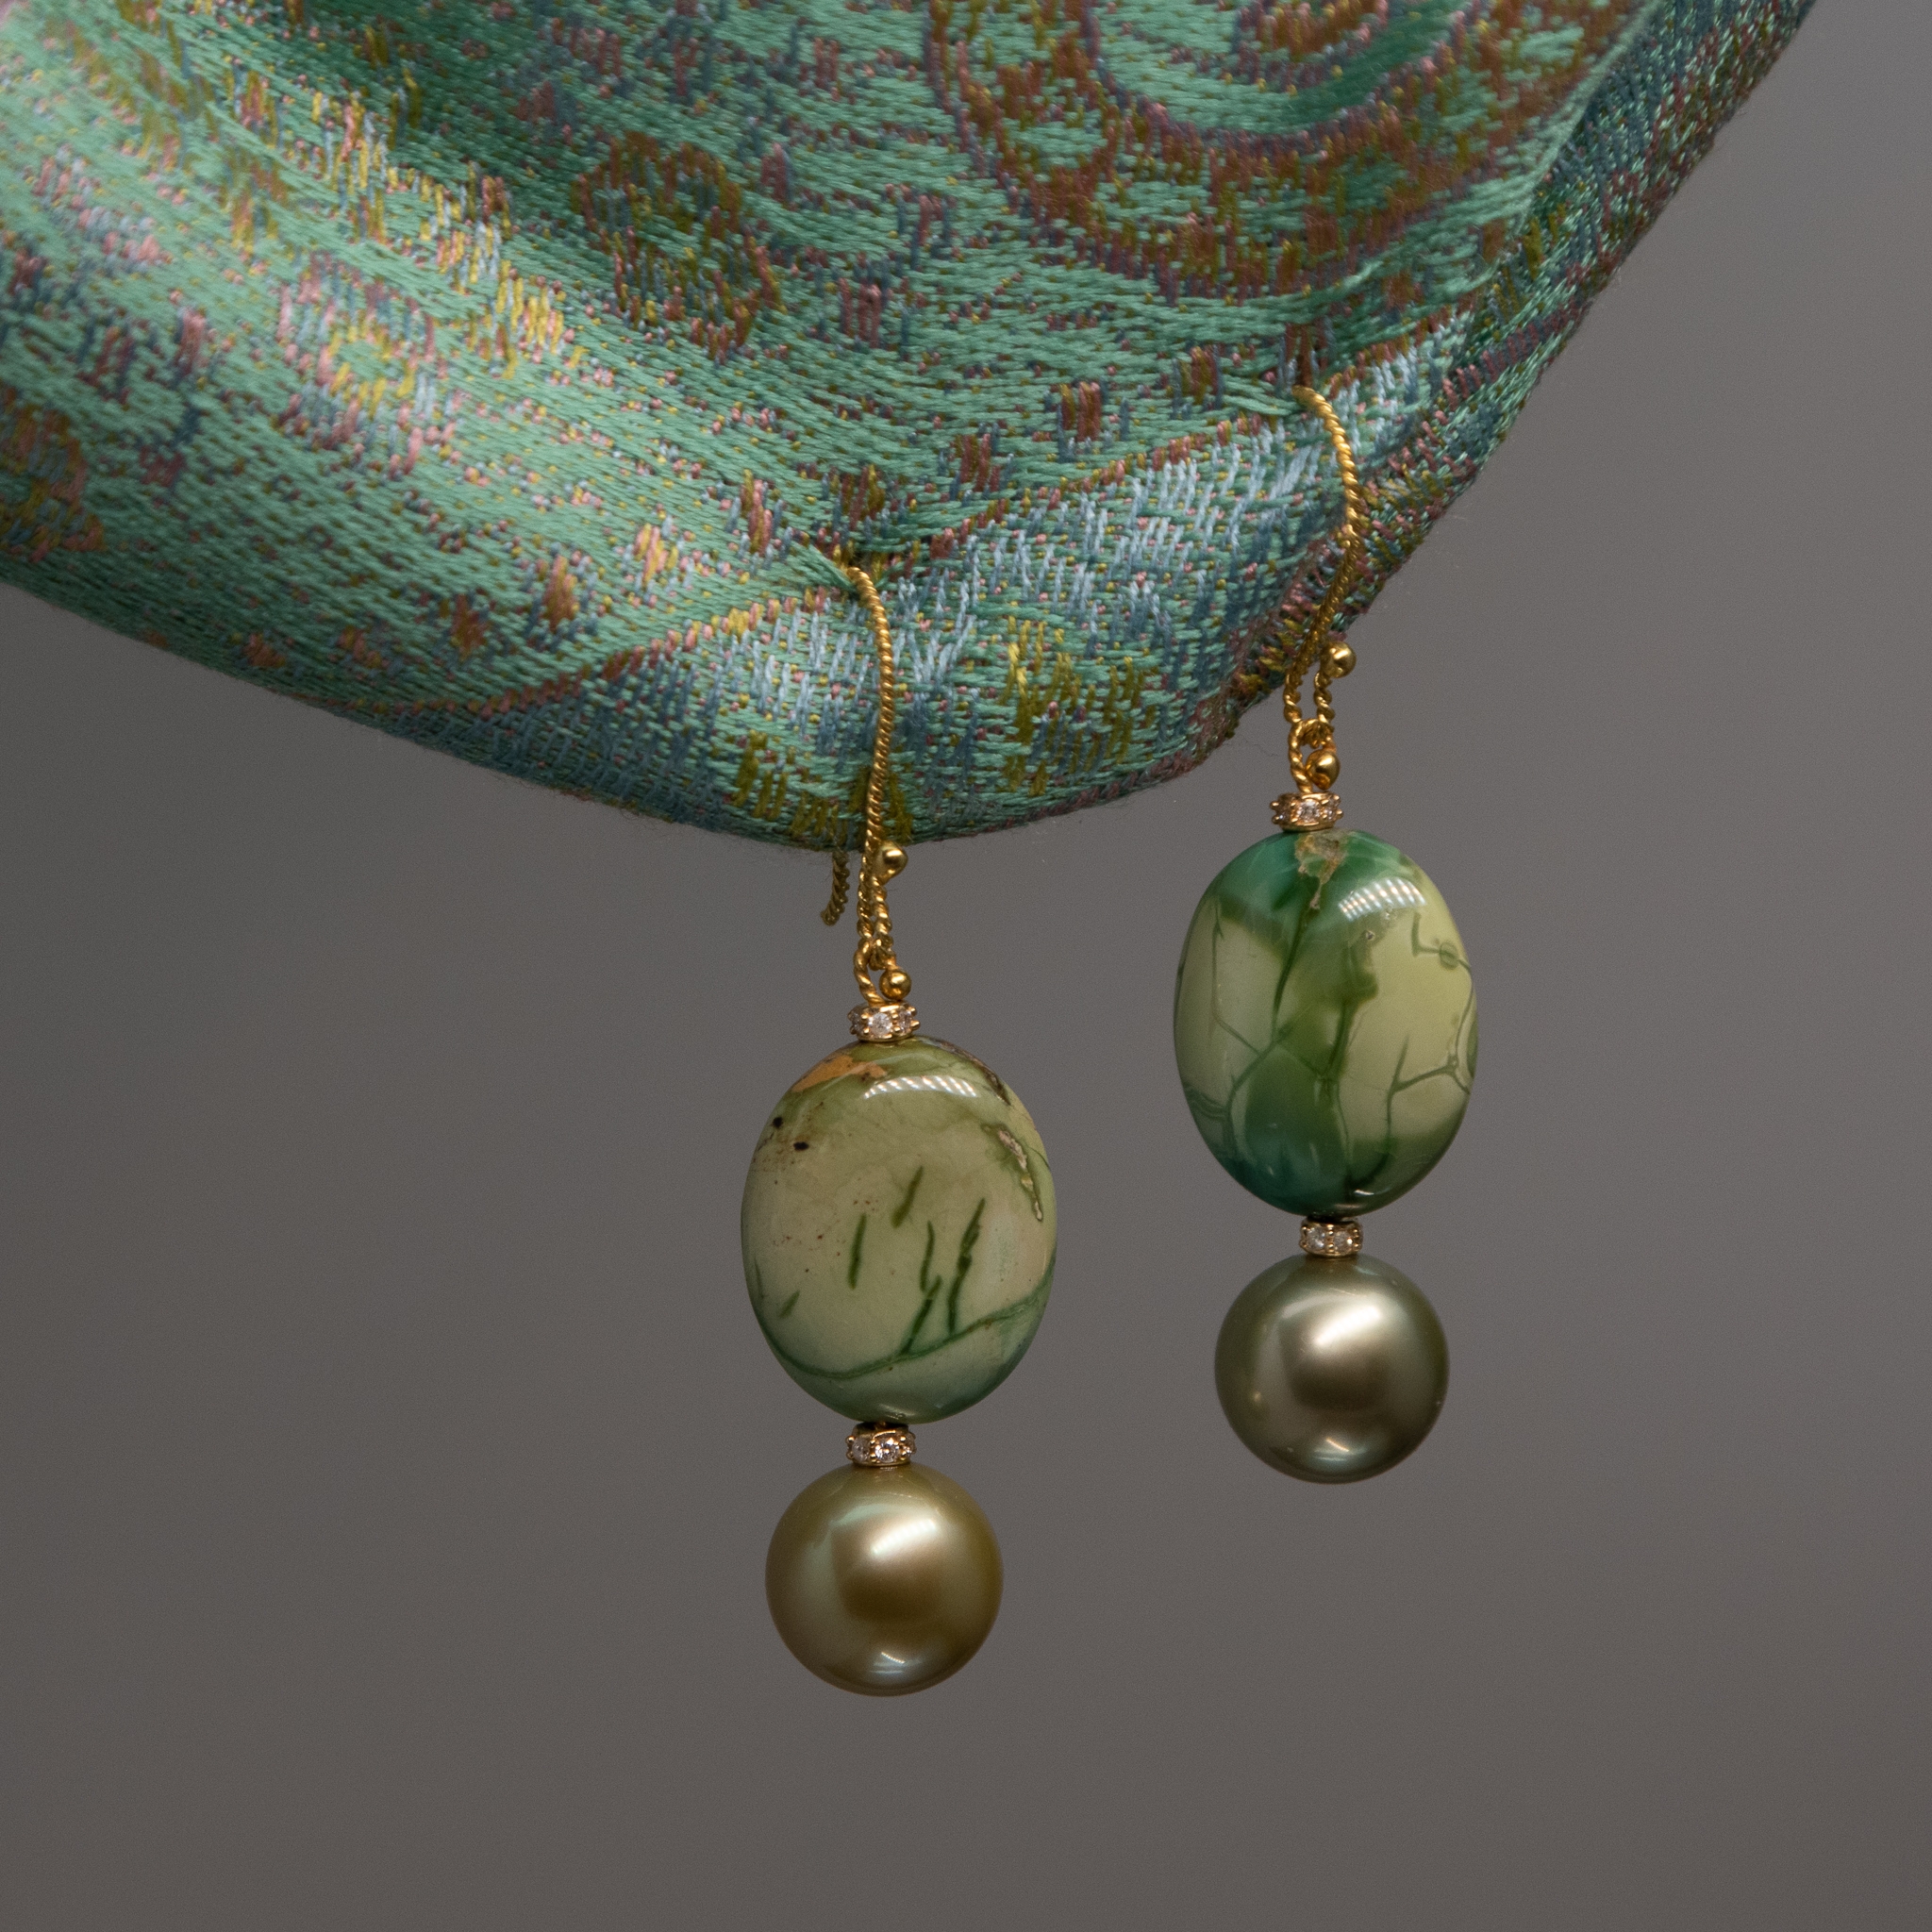 11mm pistachio colored Tahitian pearl earrings with Royal Mountain Turquoise, 18K gold and diamonds